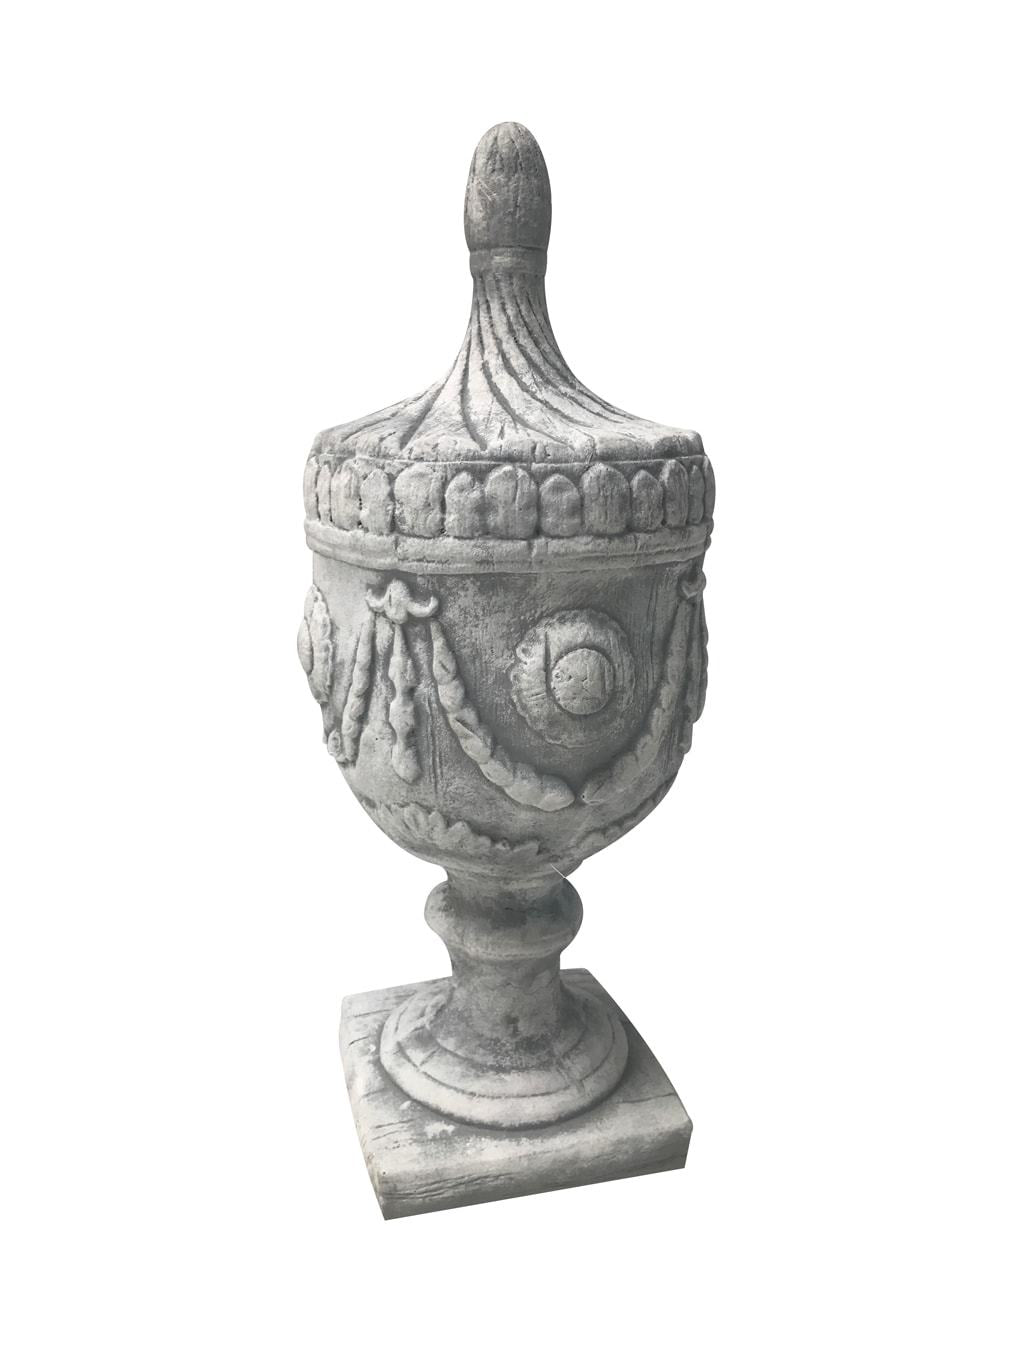 Urn Shaped Decorative Finial Garden Decoration made of Antiqued White Stone